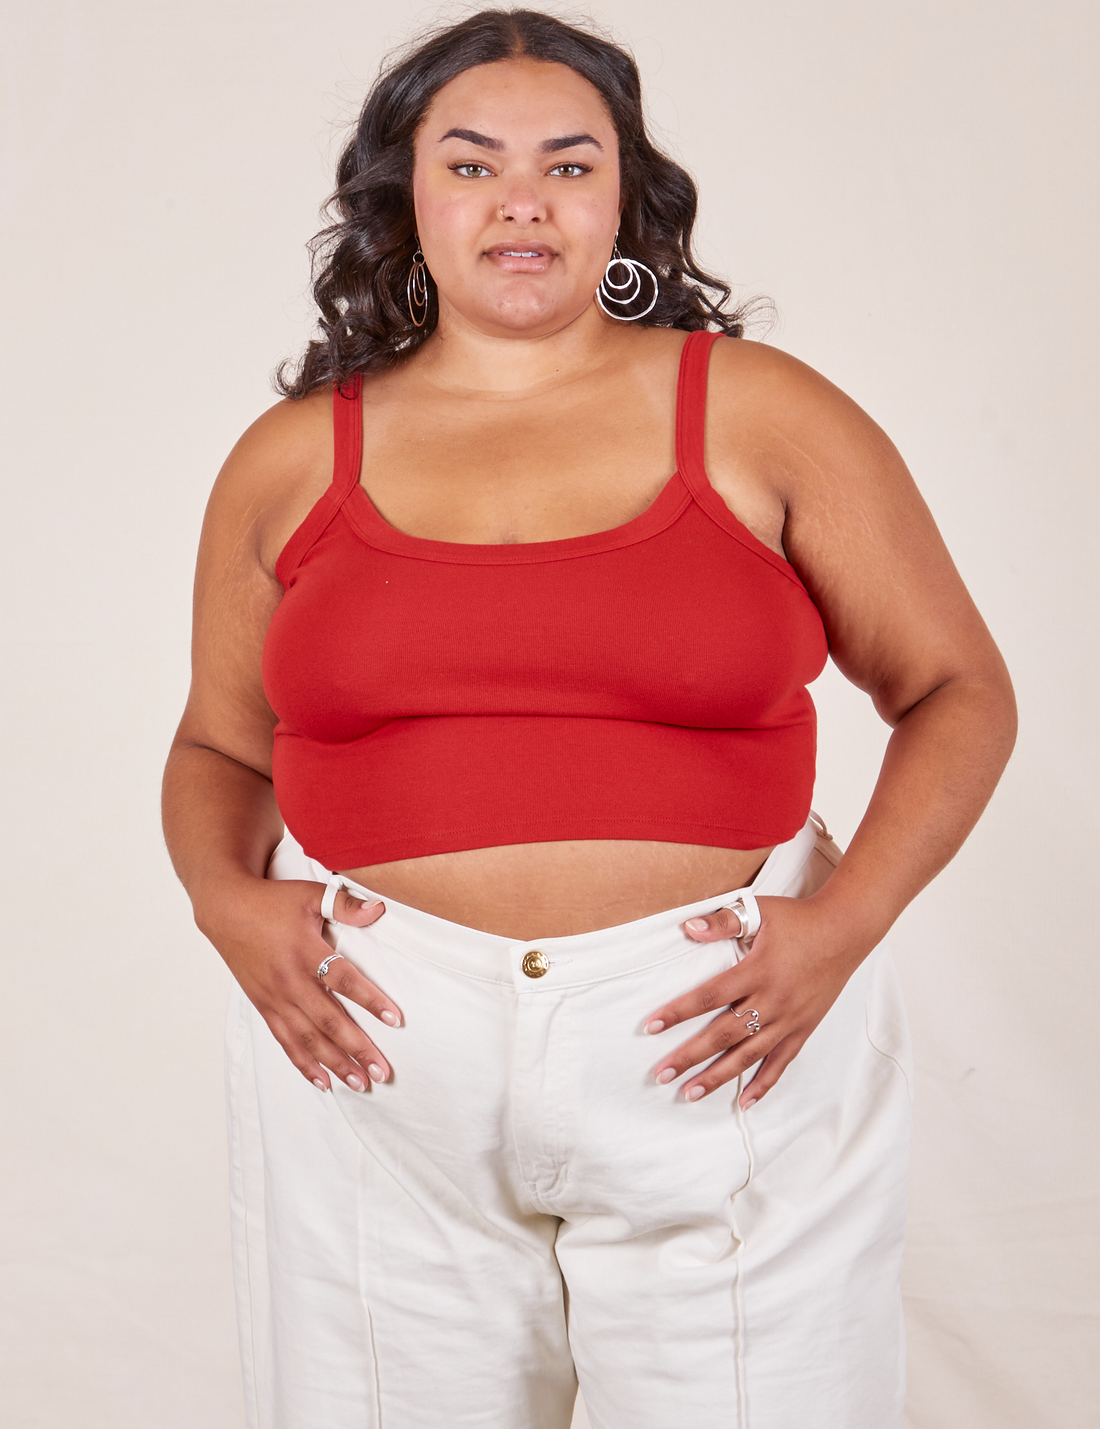 Alicia is 5'9" and wearing XL Cropped Cami in Mustang Red paired with vintage off-white Western Pants